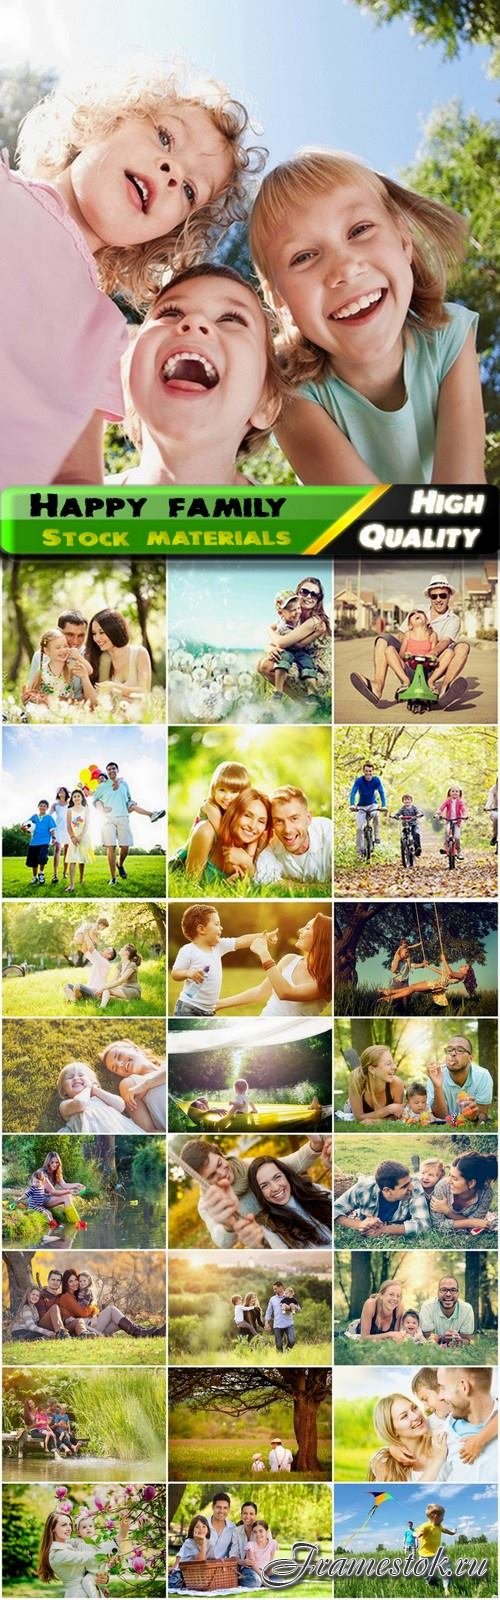 Rest of happy family at nature - 25 HQ Jpg